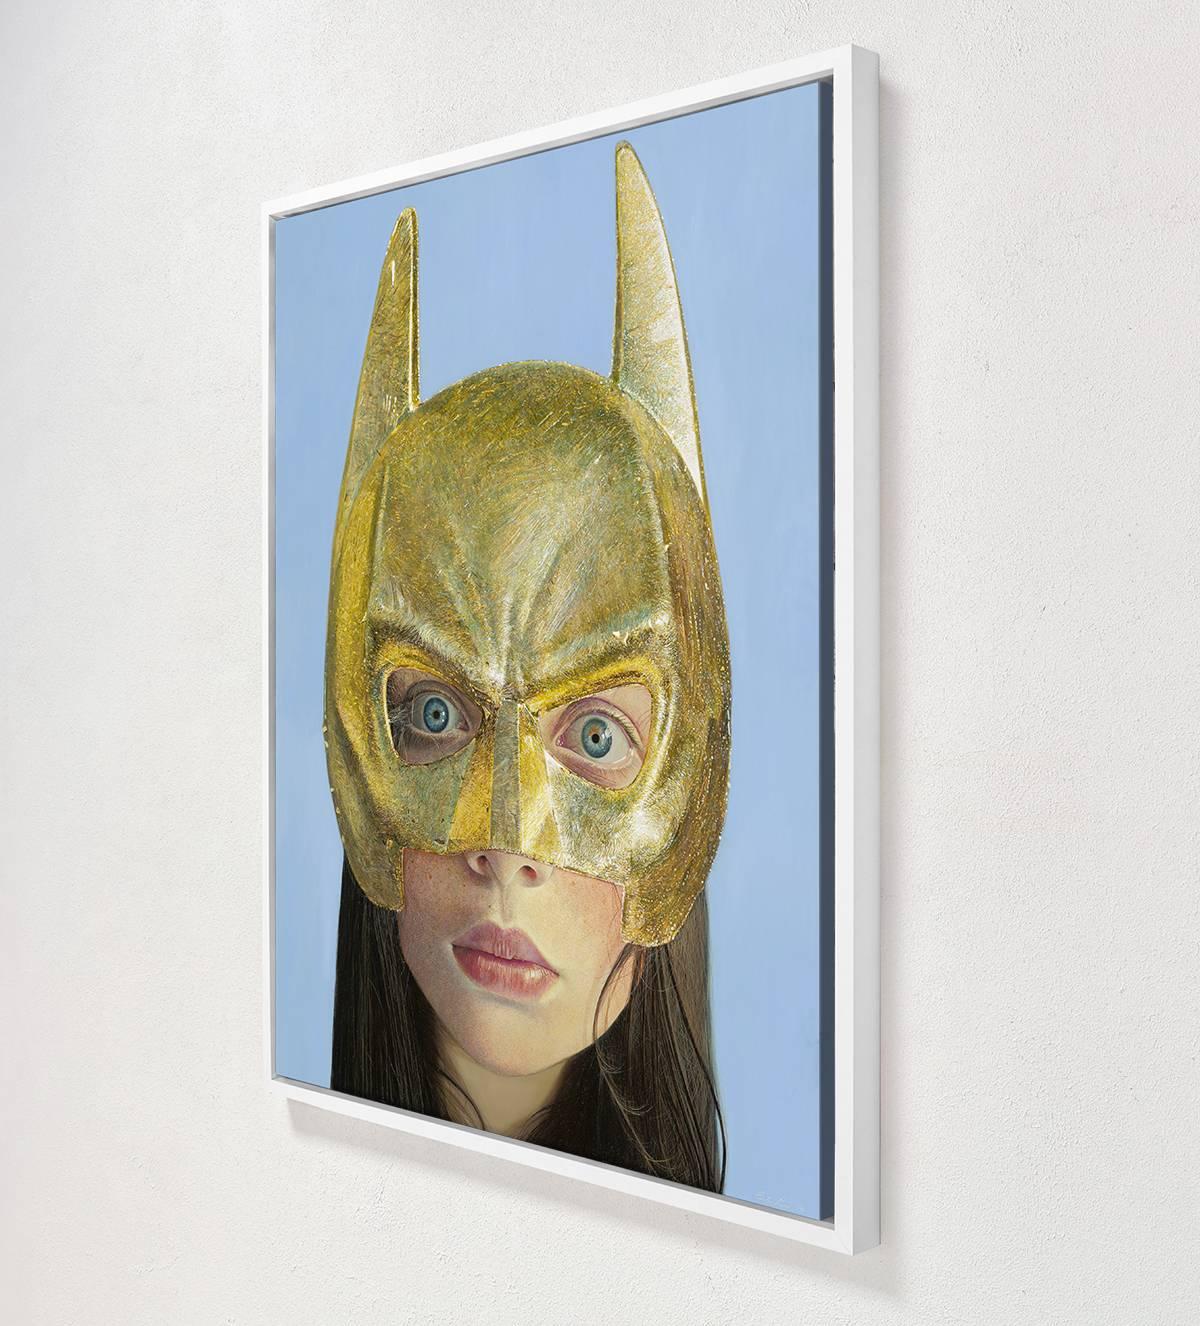 Girl With The Golden Mask - Framed Fine Art Limited Edition of 69 - Gray Figurative Print by Gordon Harris